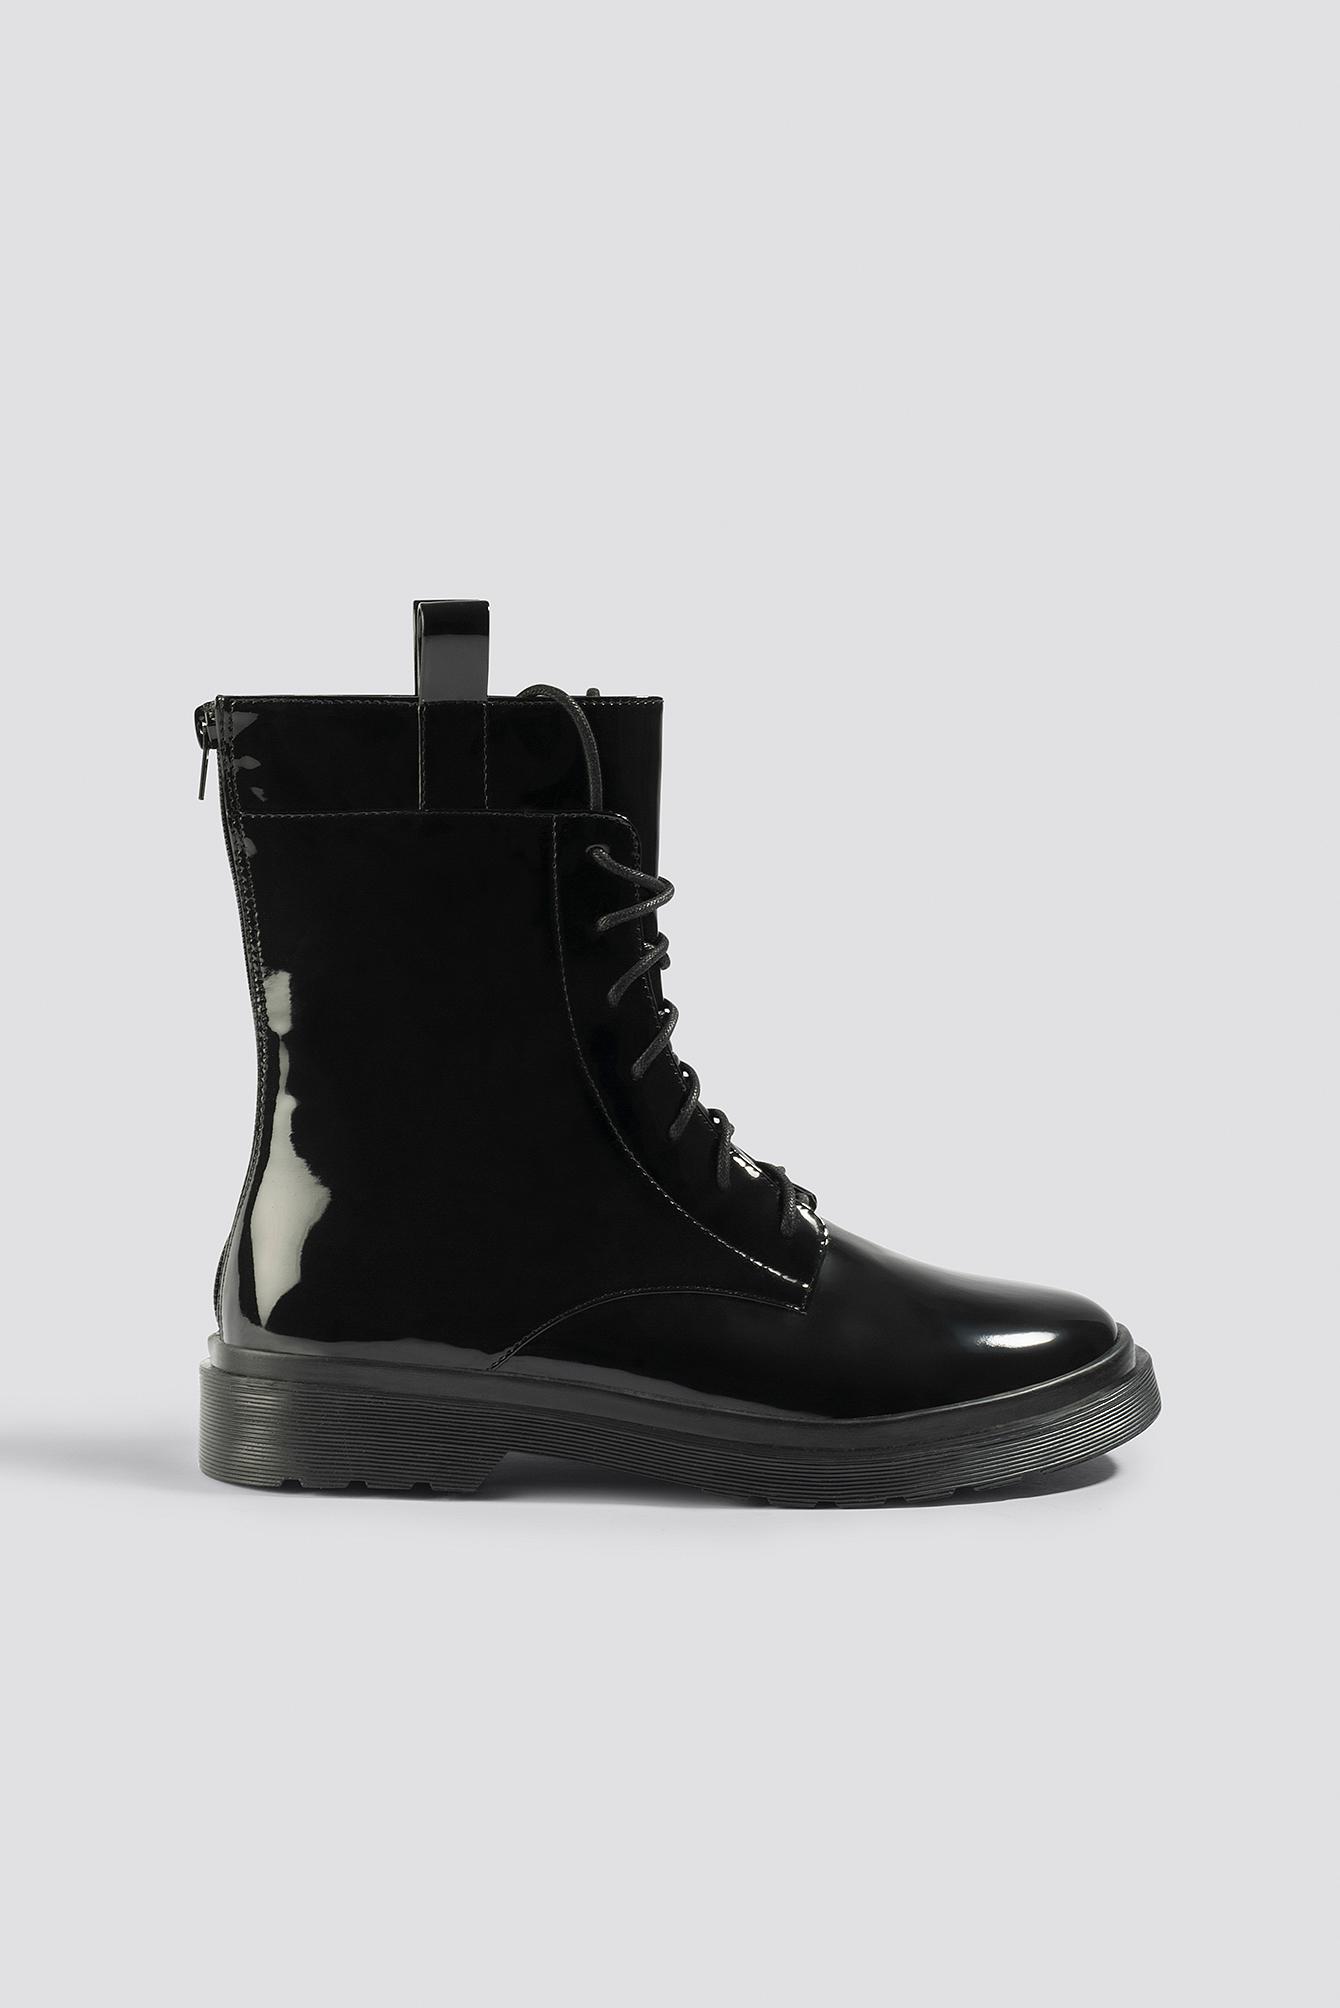 NA-KD Chunky Boots Black in Black - Lyst